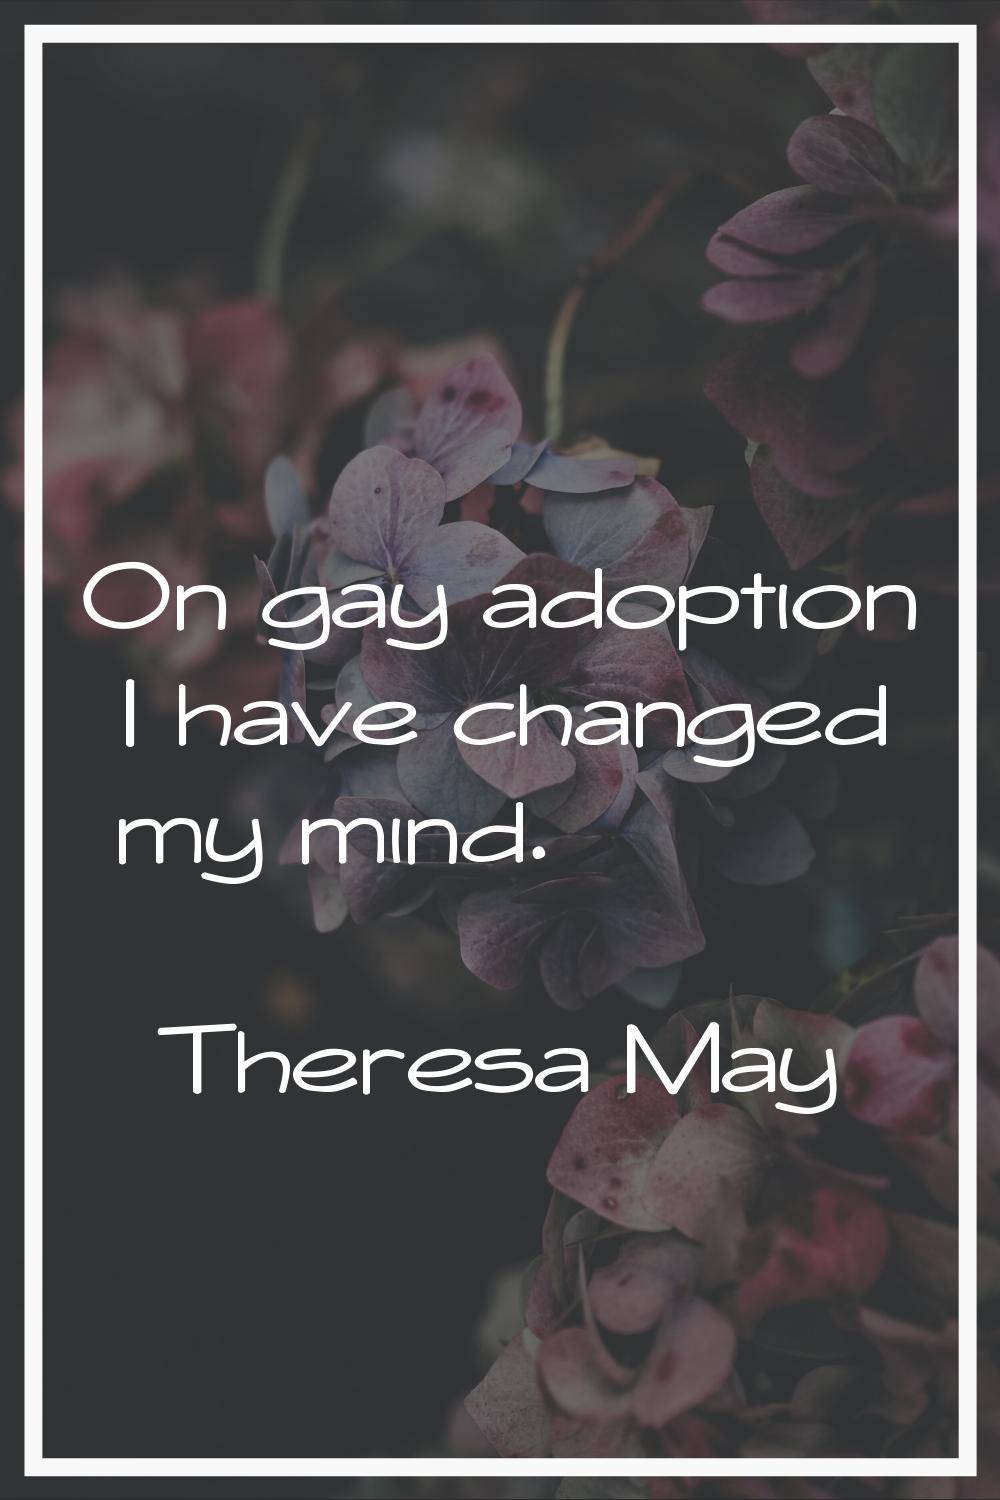 On gay adoption I have changed my mind.